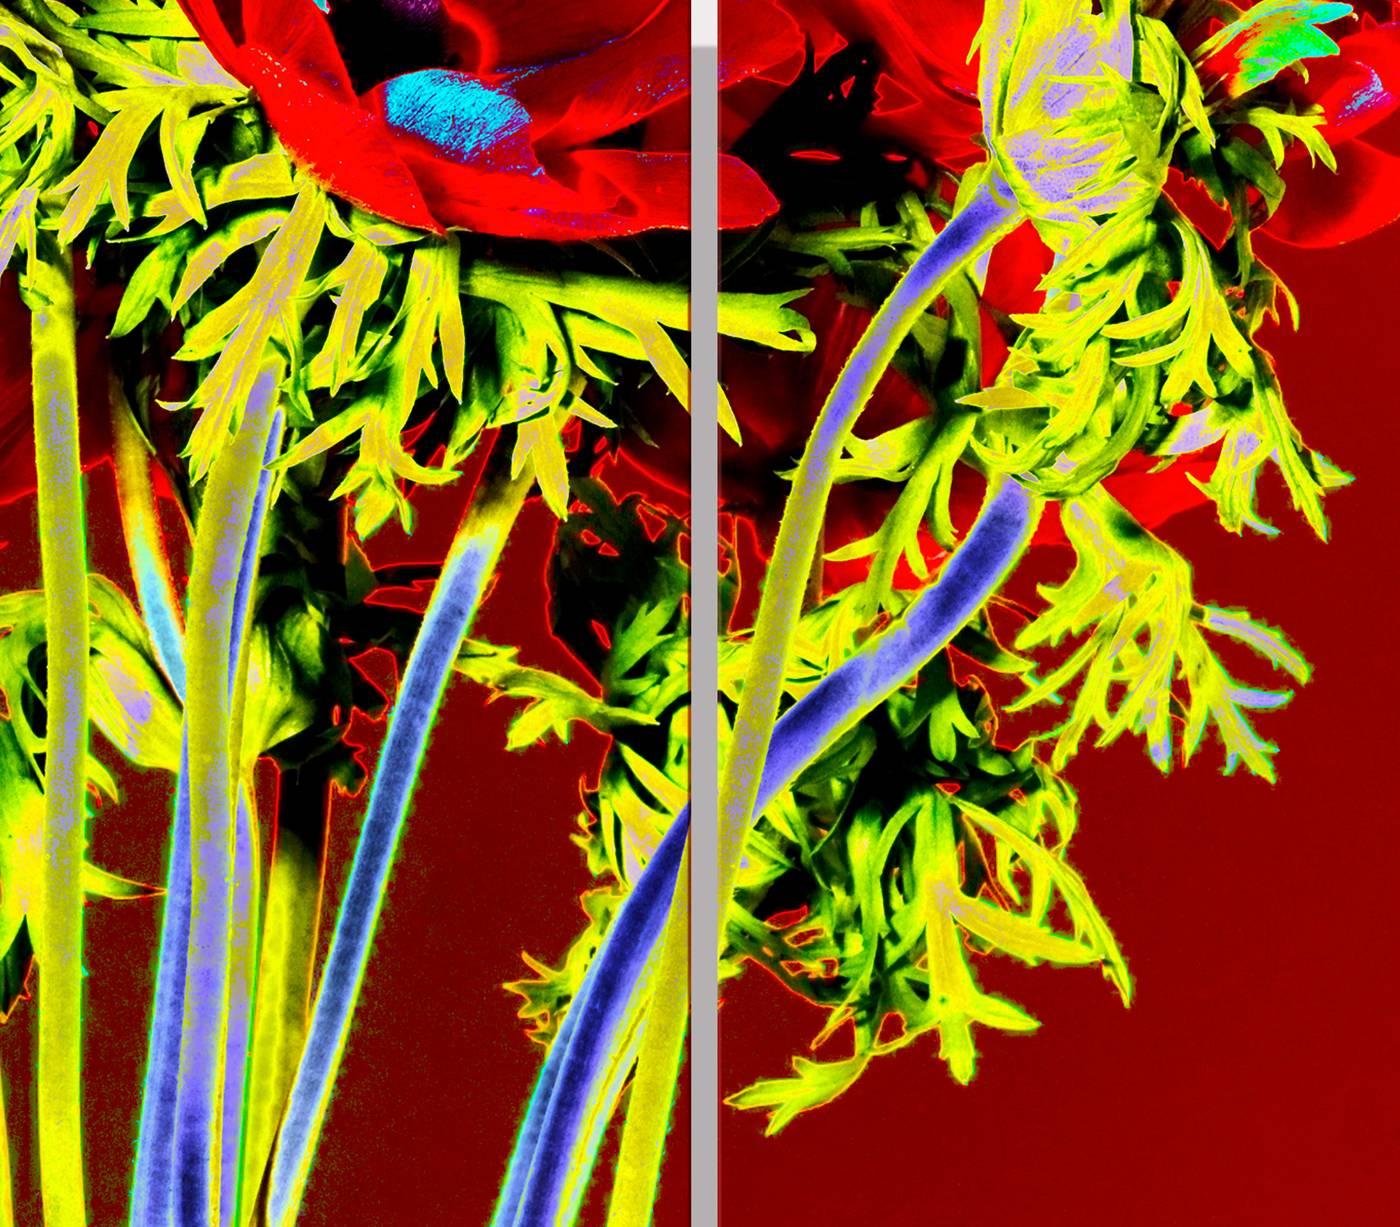 REDSOL, Red flower bouquet, human size flower bouquet,  - Abstract Photograph by Albert Delamour